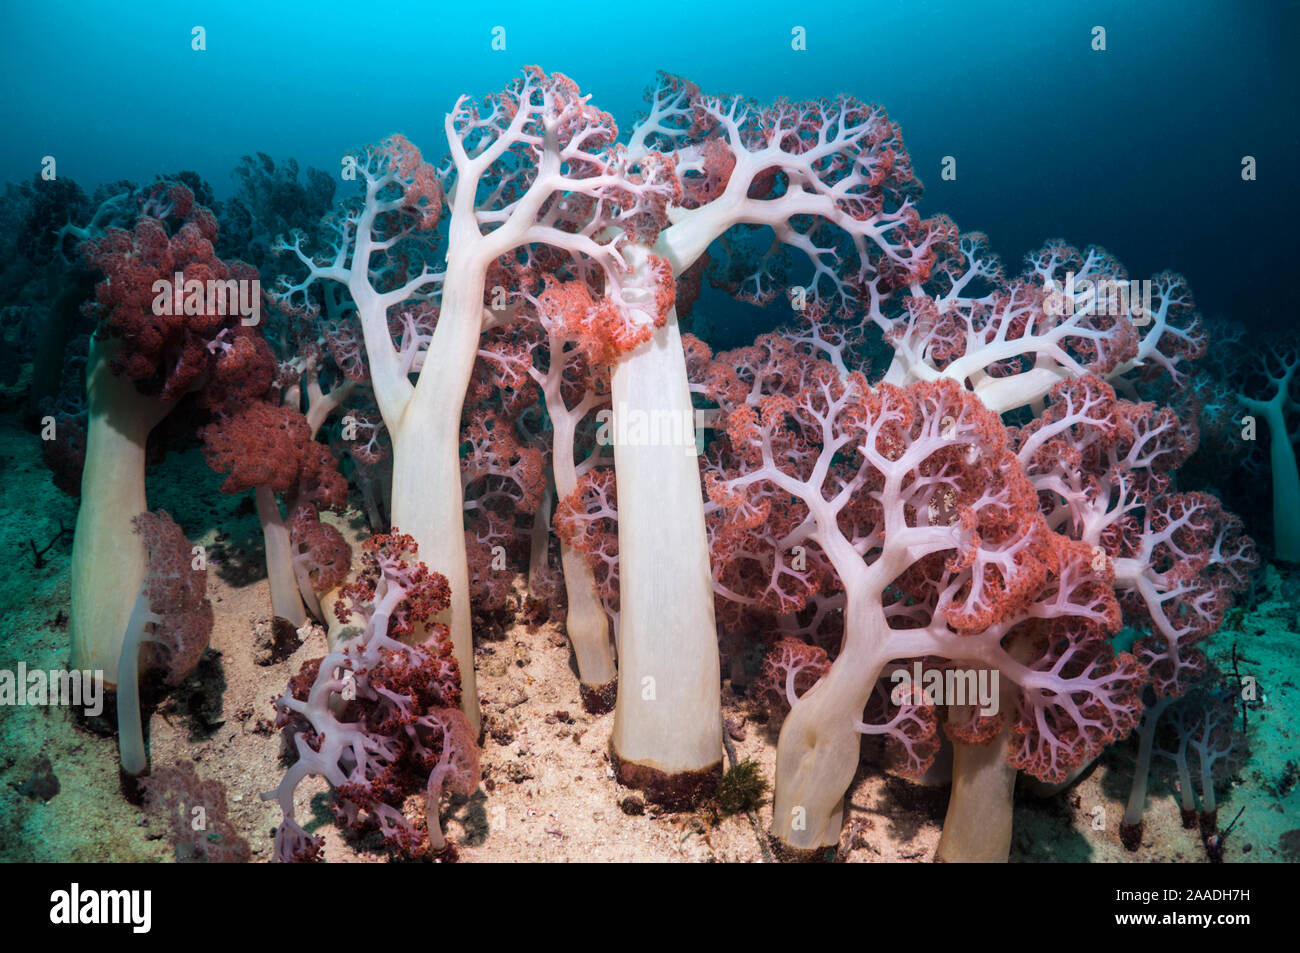 Soft corals (Dendronephthya sp) in coral reef, West Papua, New Guinea. Stock Photo